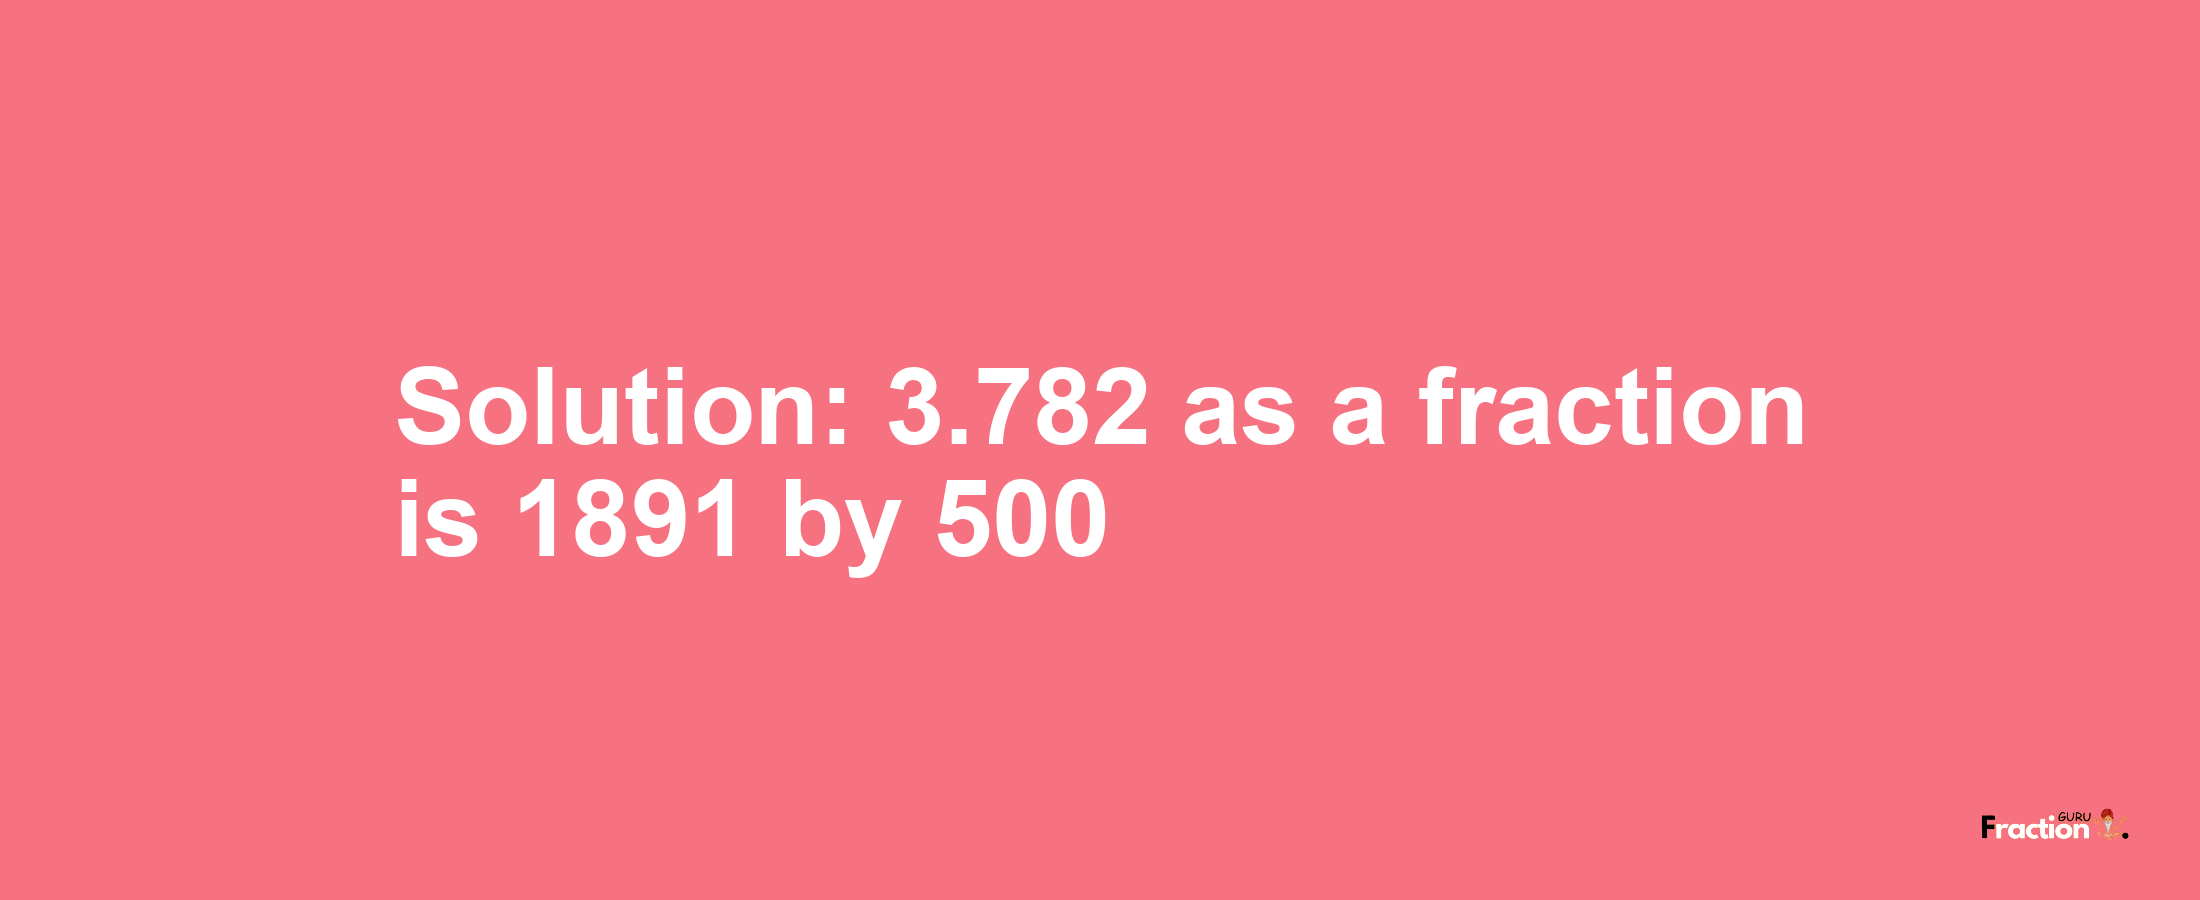 Solution:3.782 as a fraction is 1891/500